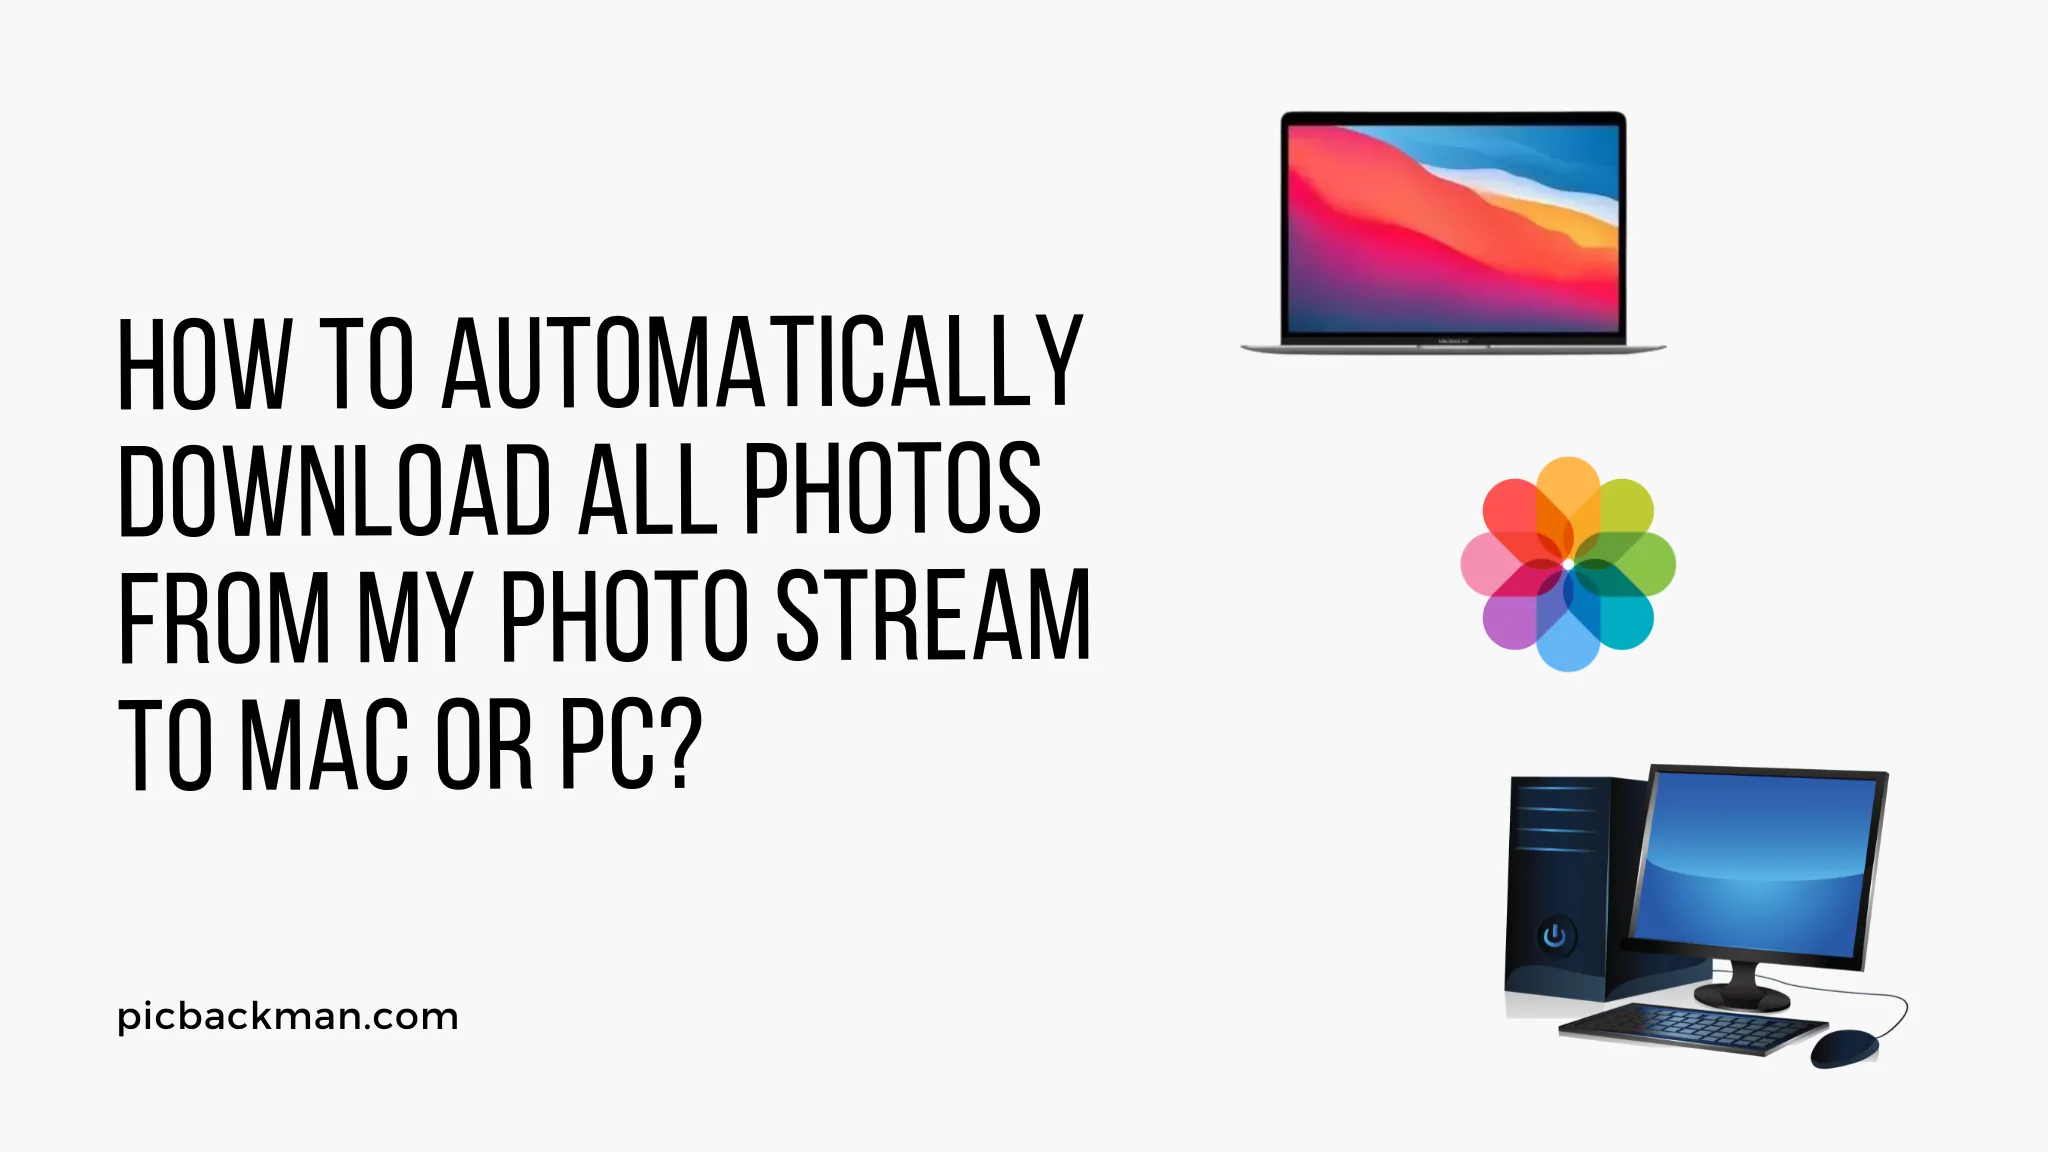 How to Automatically Download All Photos from My Photo Stream to Mac or PC?